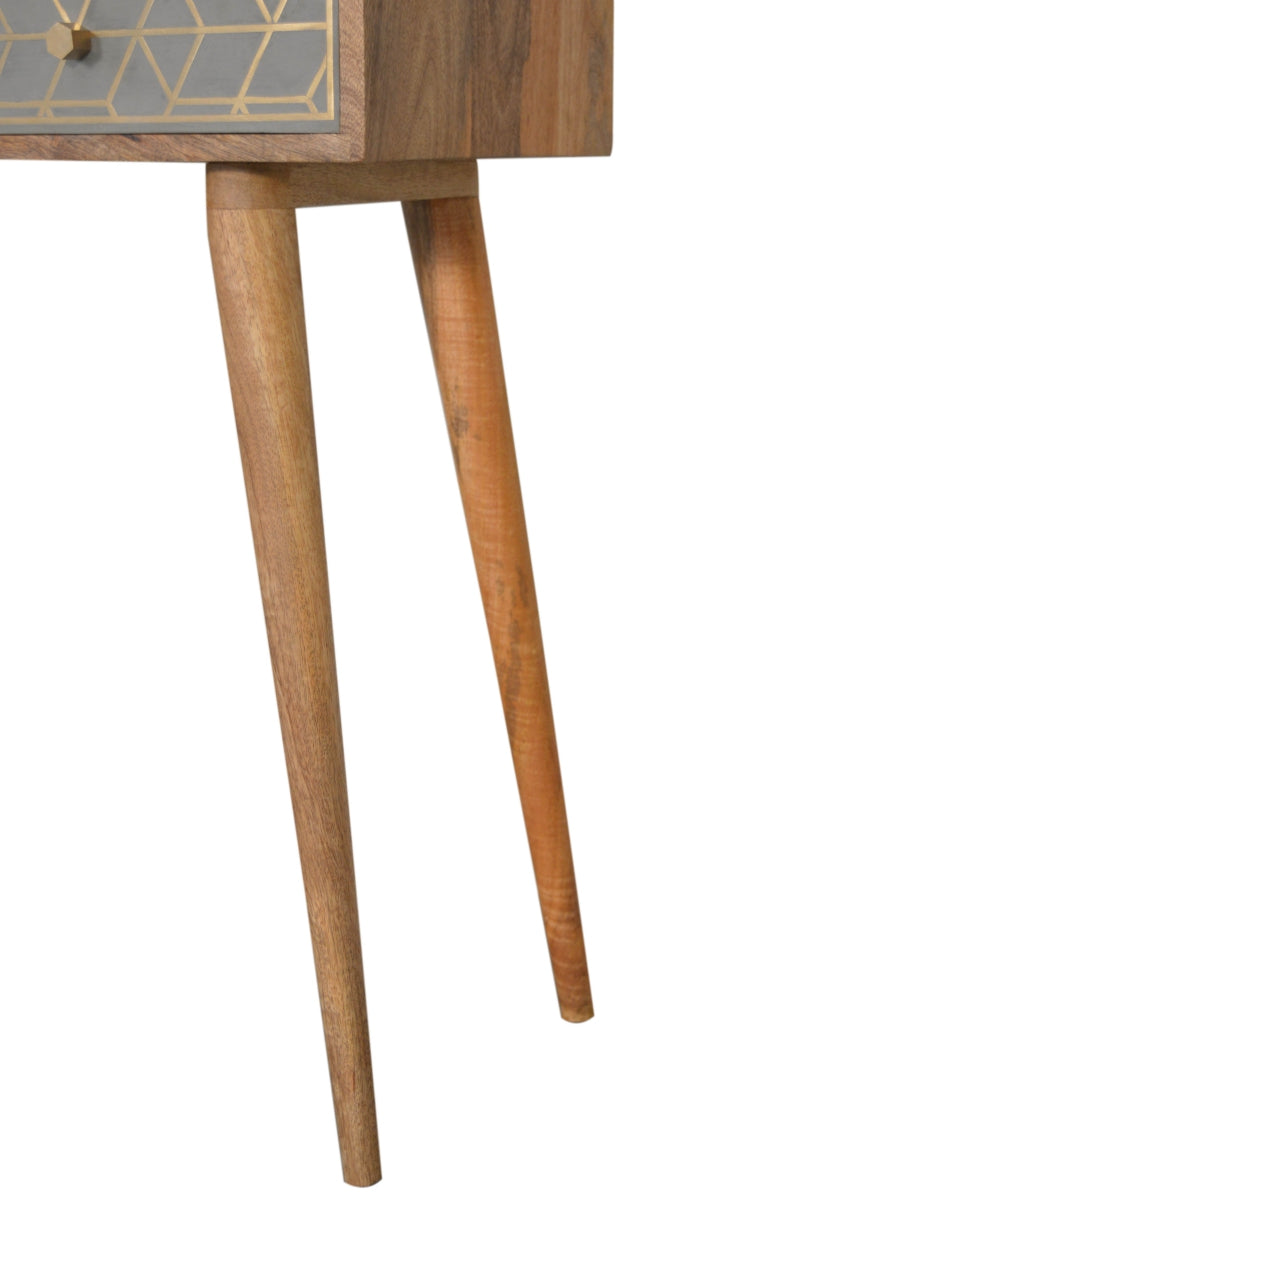 Solid Wood Dice Console Table